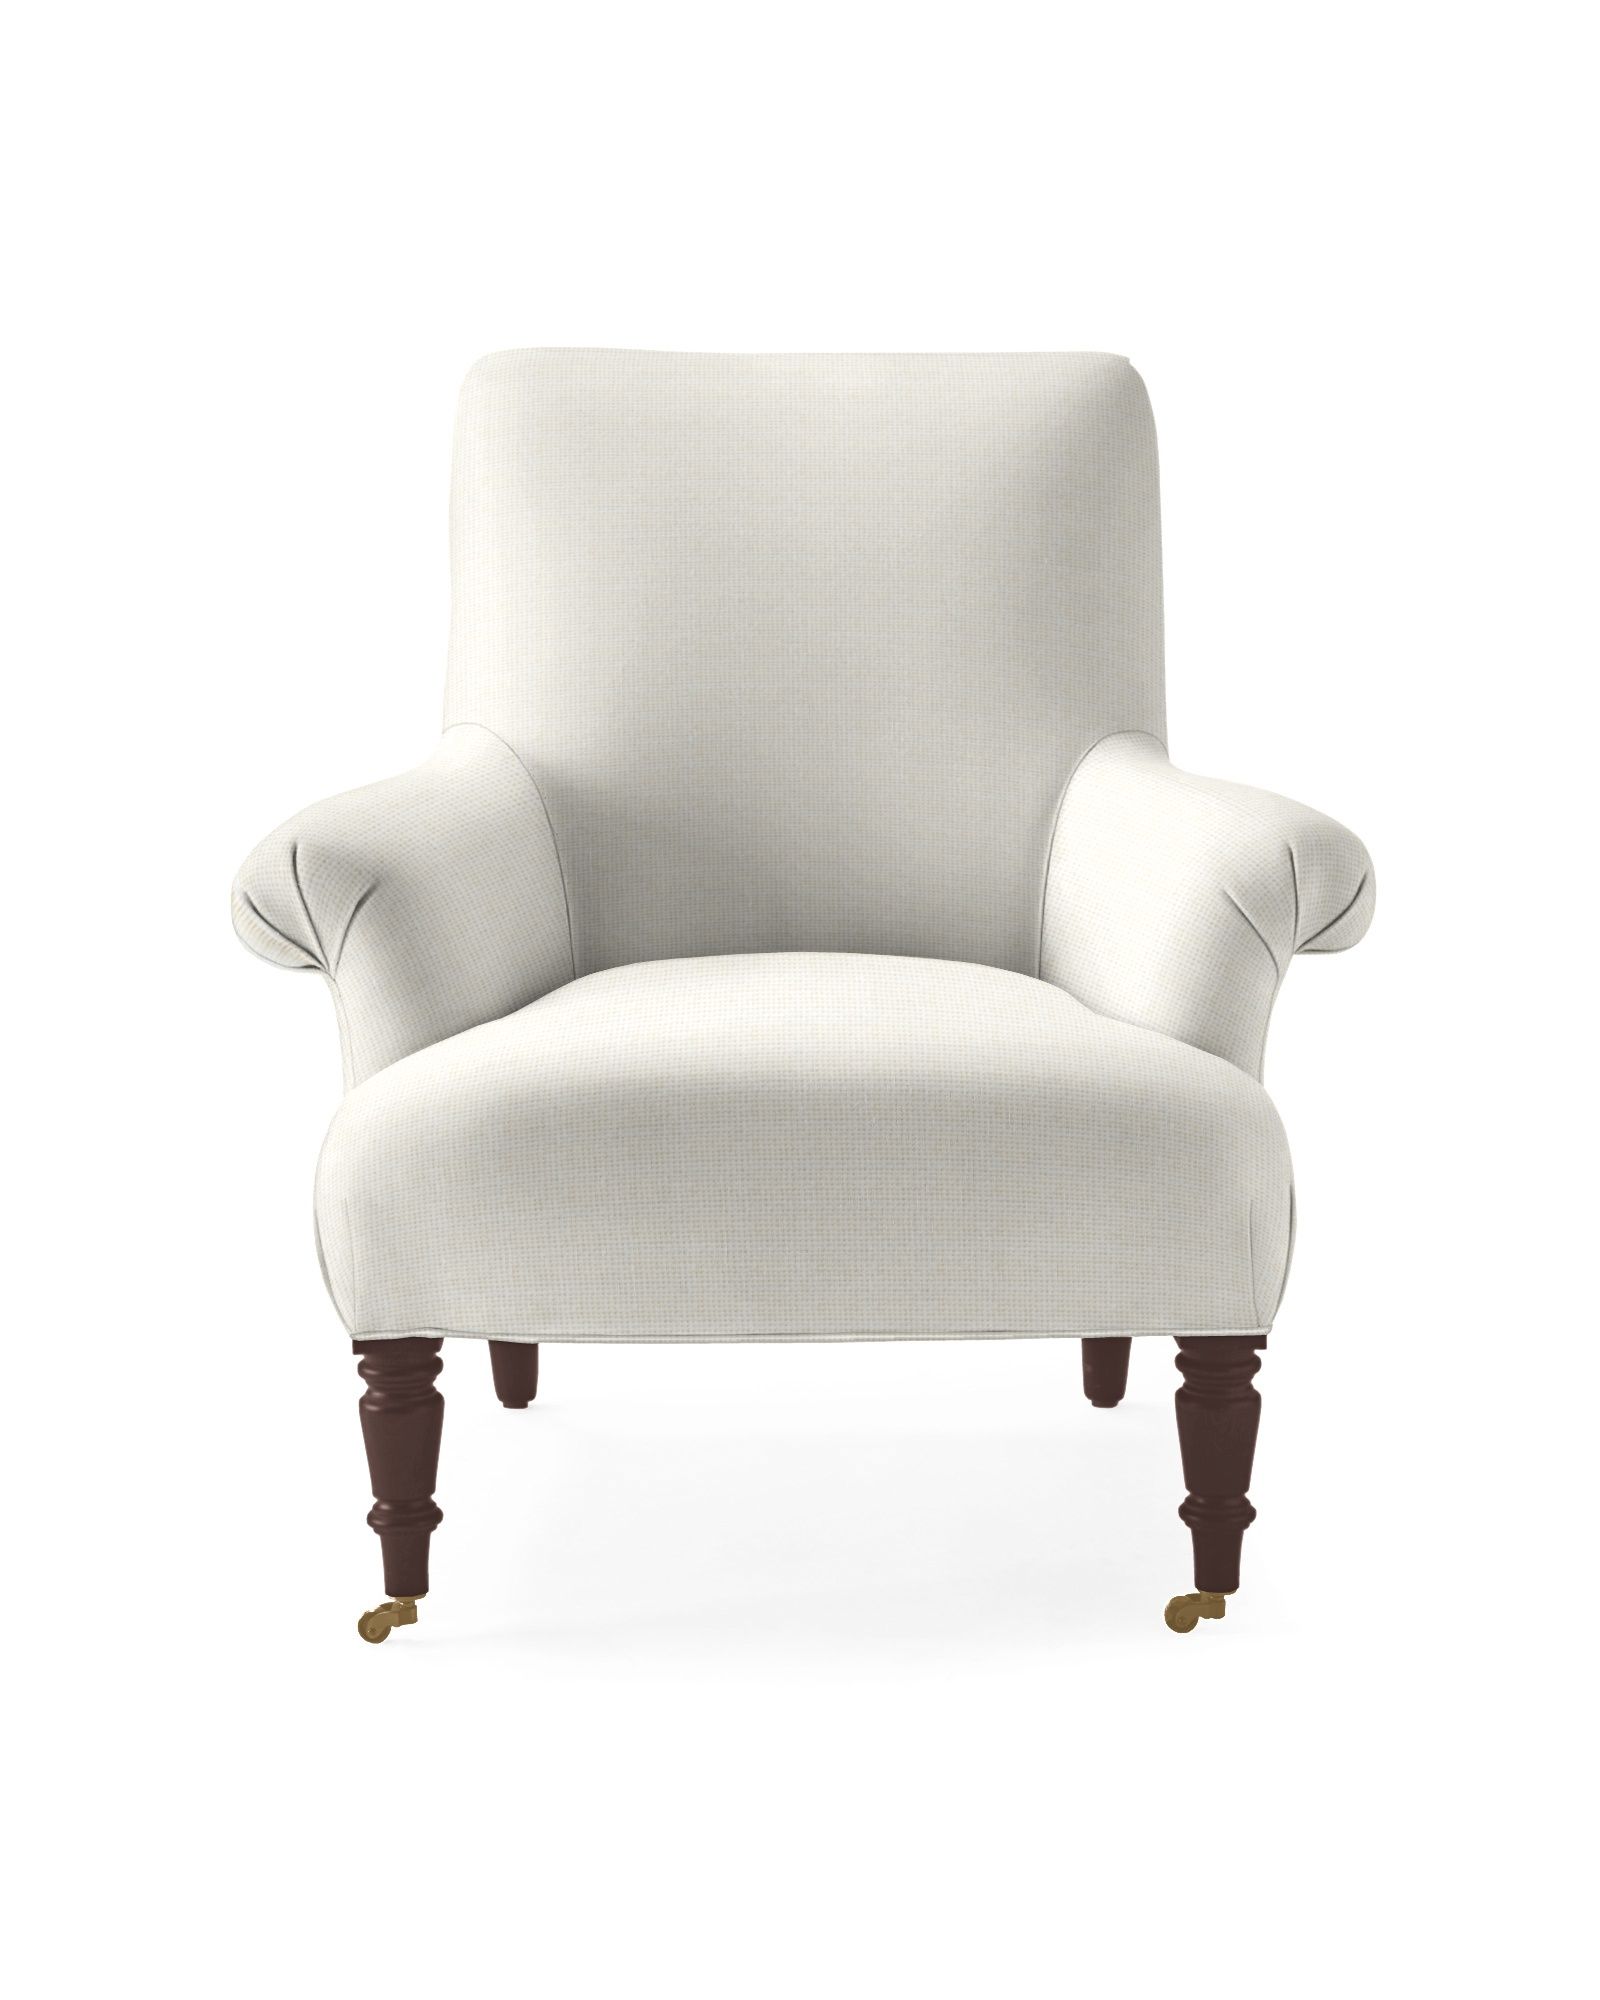 Avignon Chair | Serena and Lily